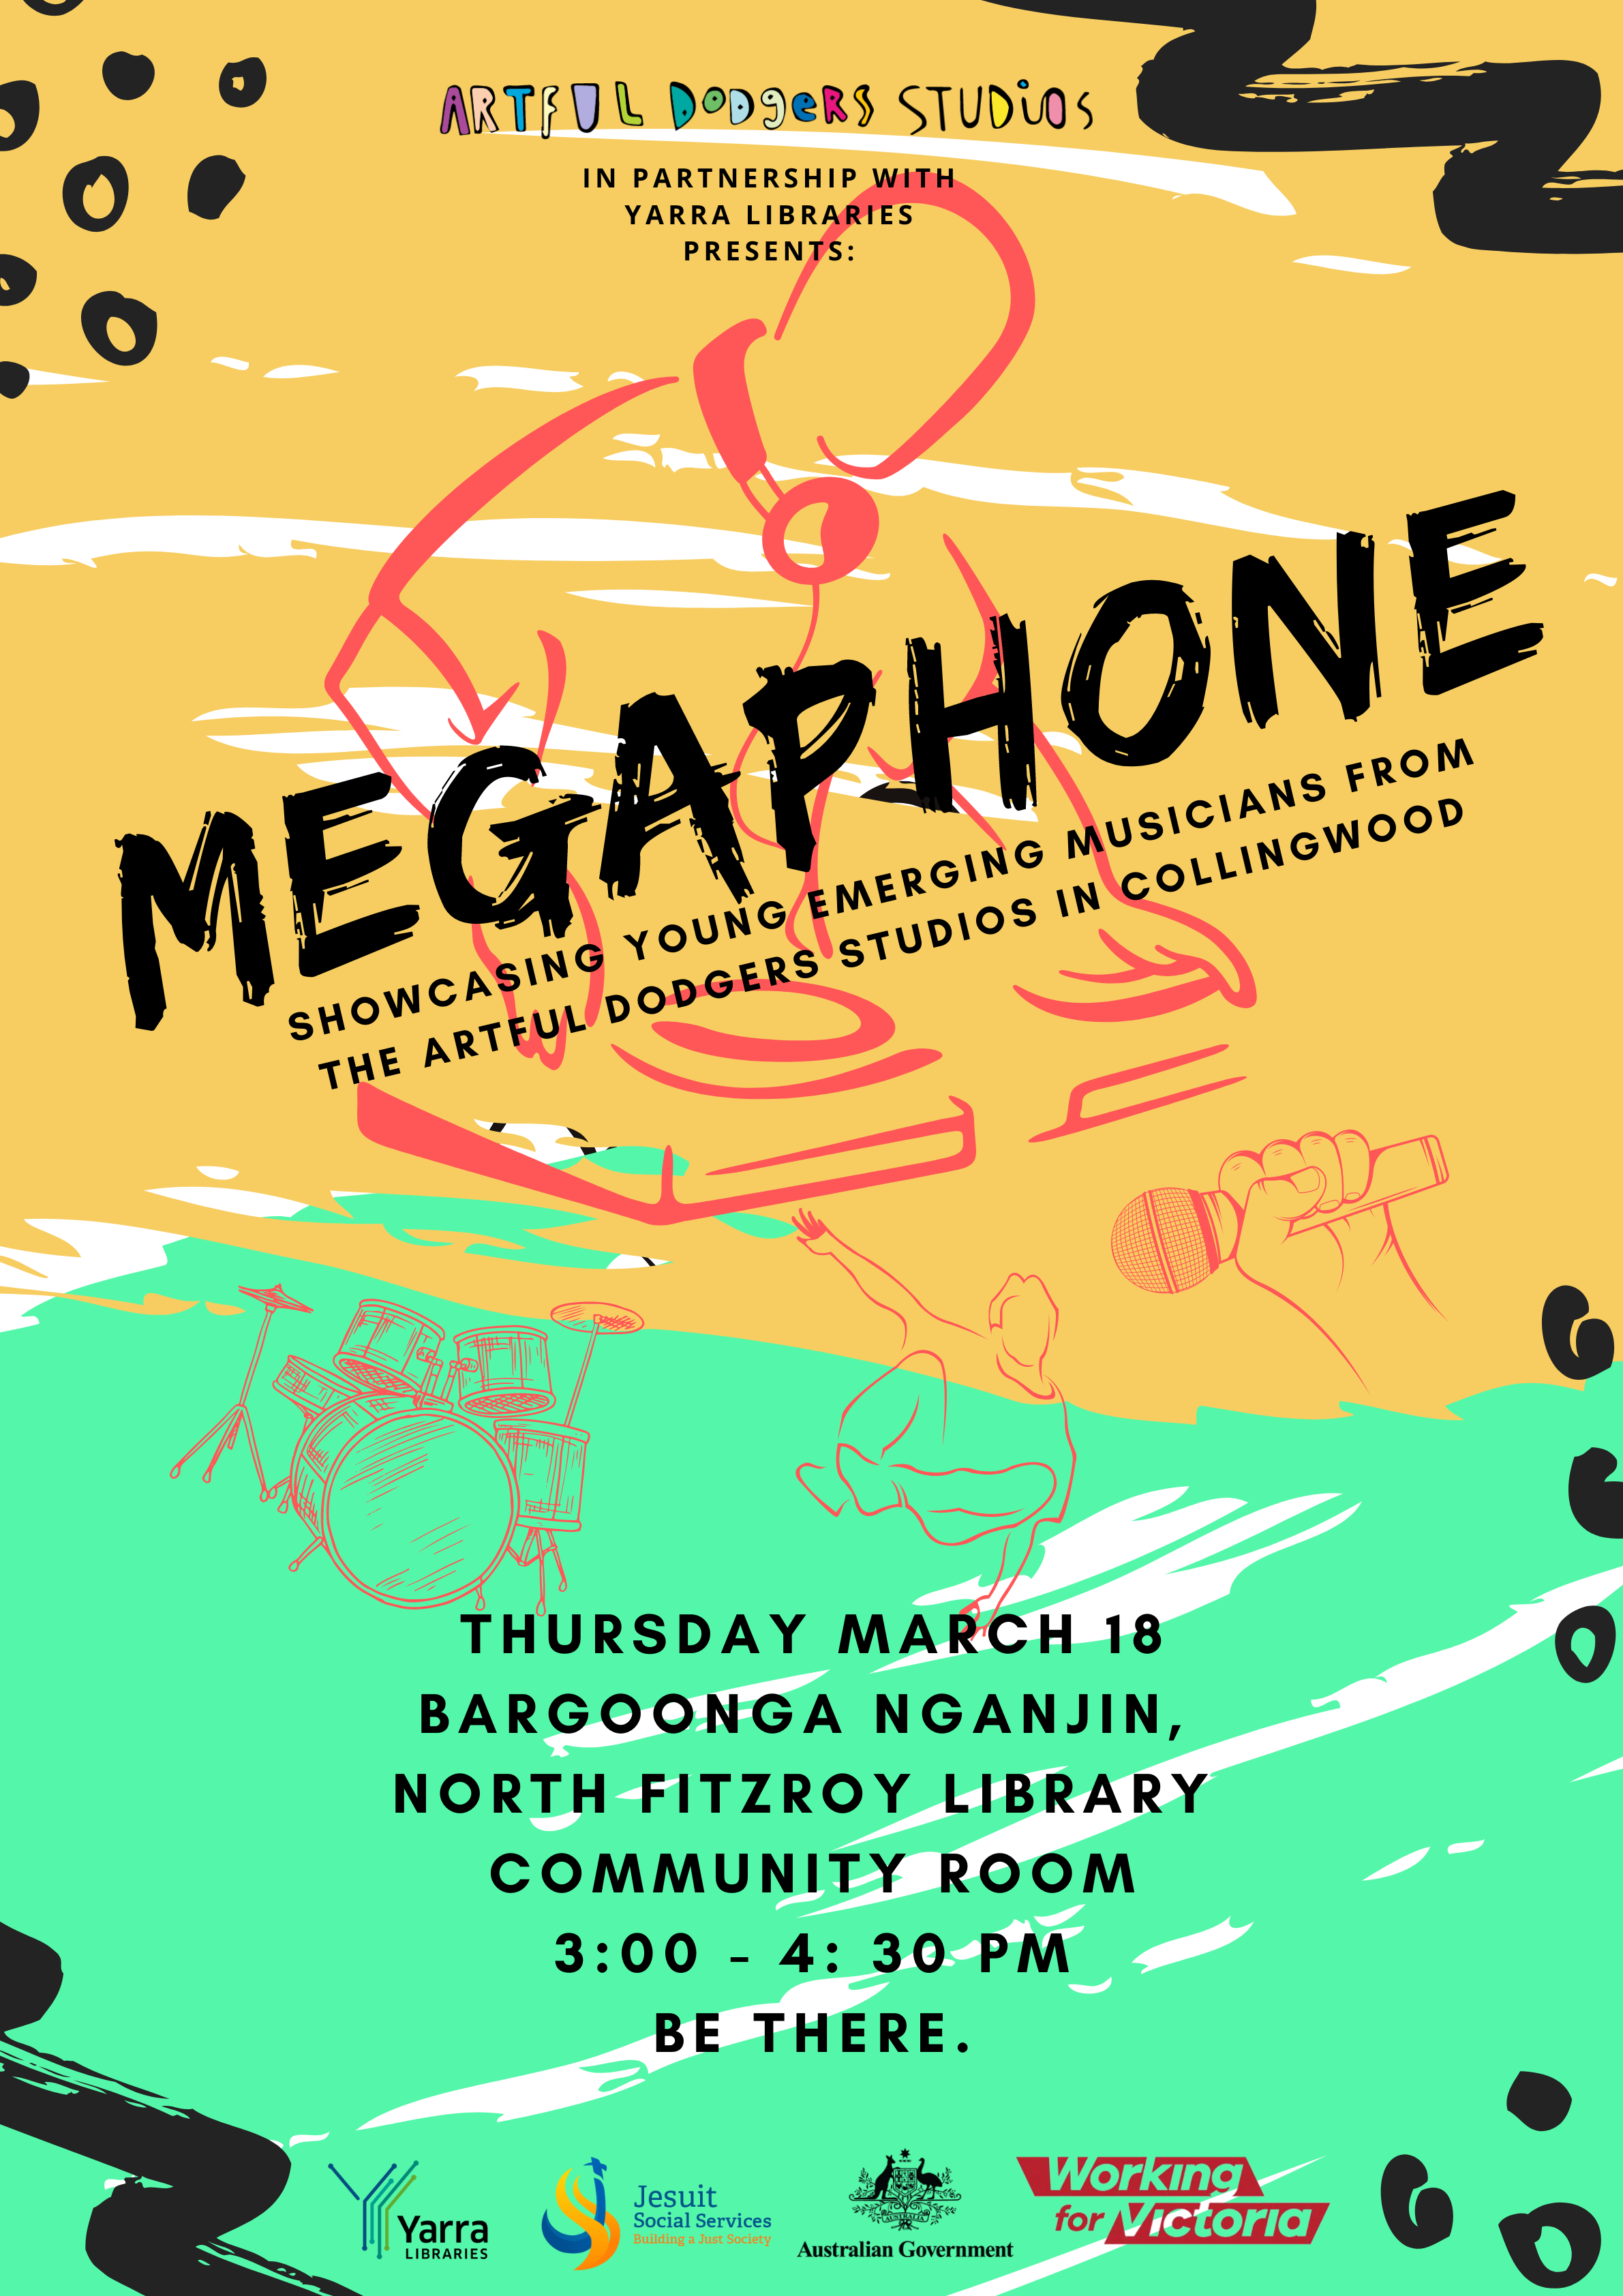 Poster: Megaphone - showcasing young emerging musicians from the Artful Dodgers Studios in Collingwood. Thursday March 18 at Bargoonga Nganjin, North Fitzroy Library, 3-4.30pm. Be there. 